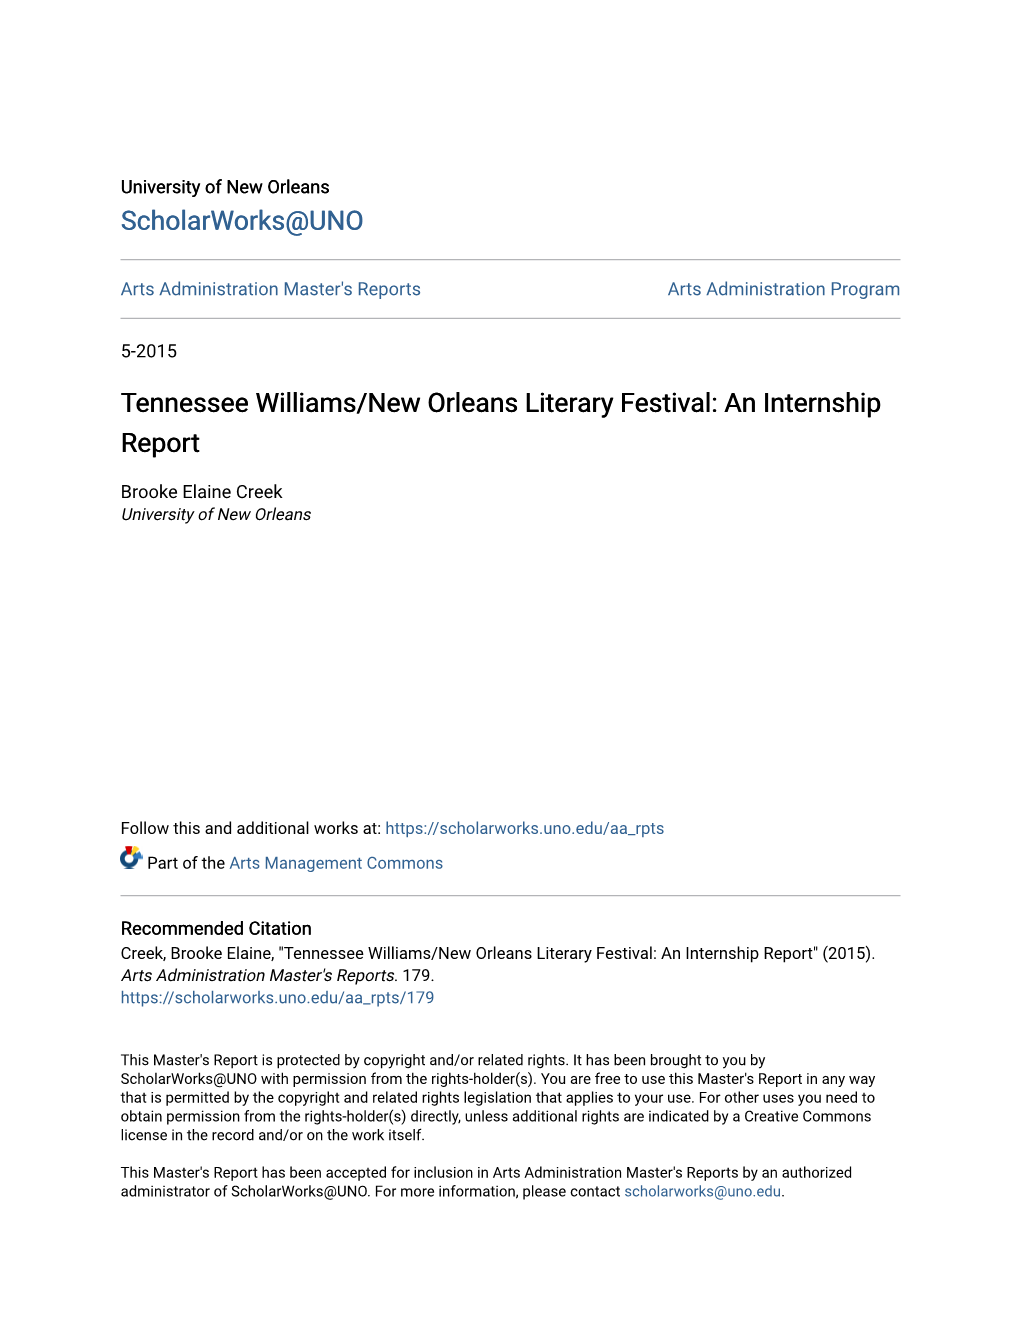 Tennessee Williams/New Orleans Literary Festival: an Internship Report